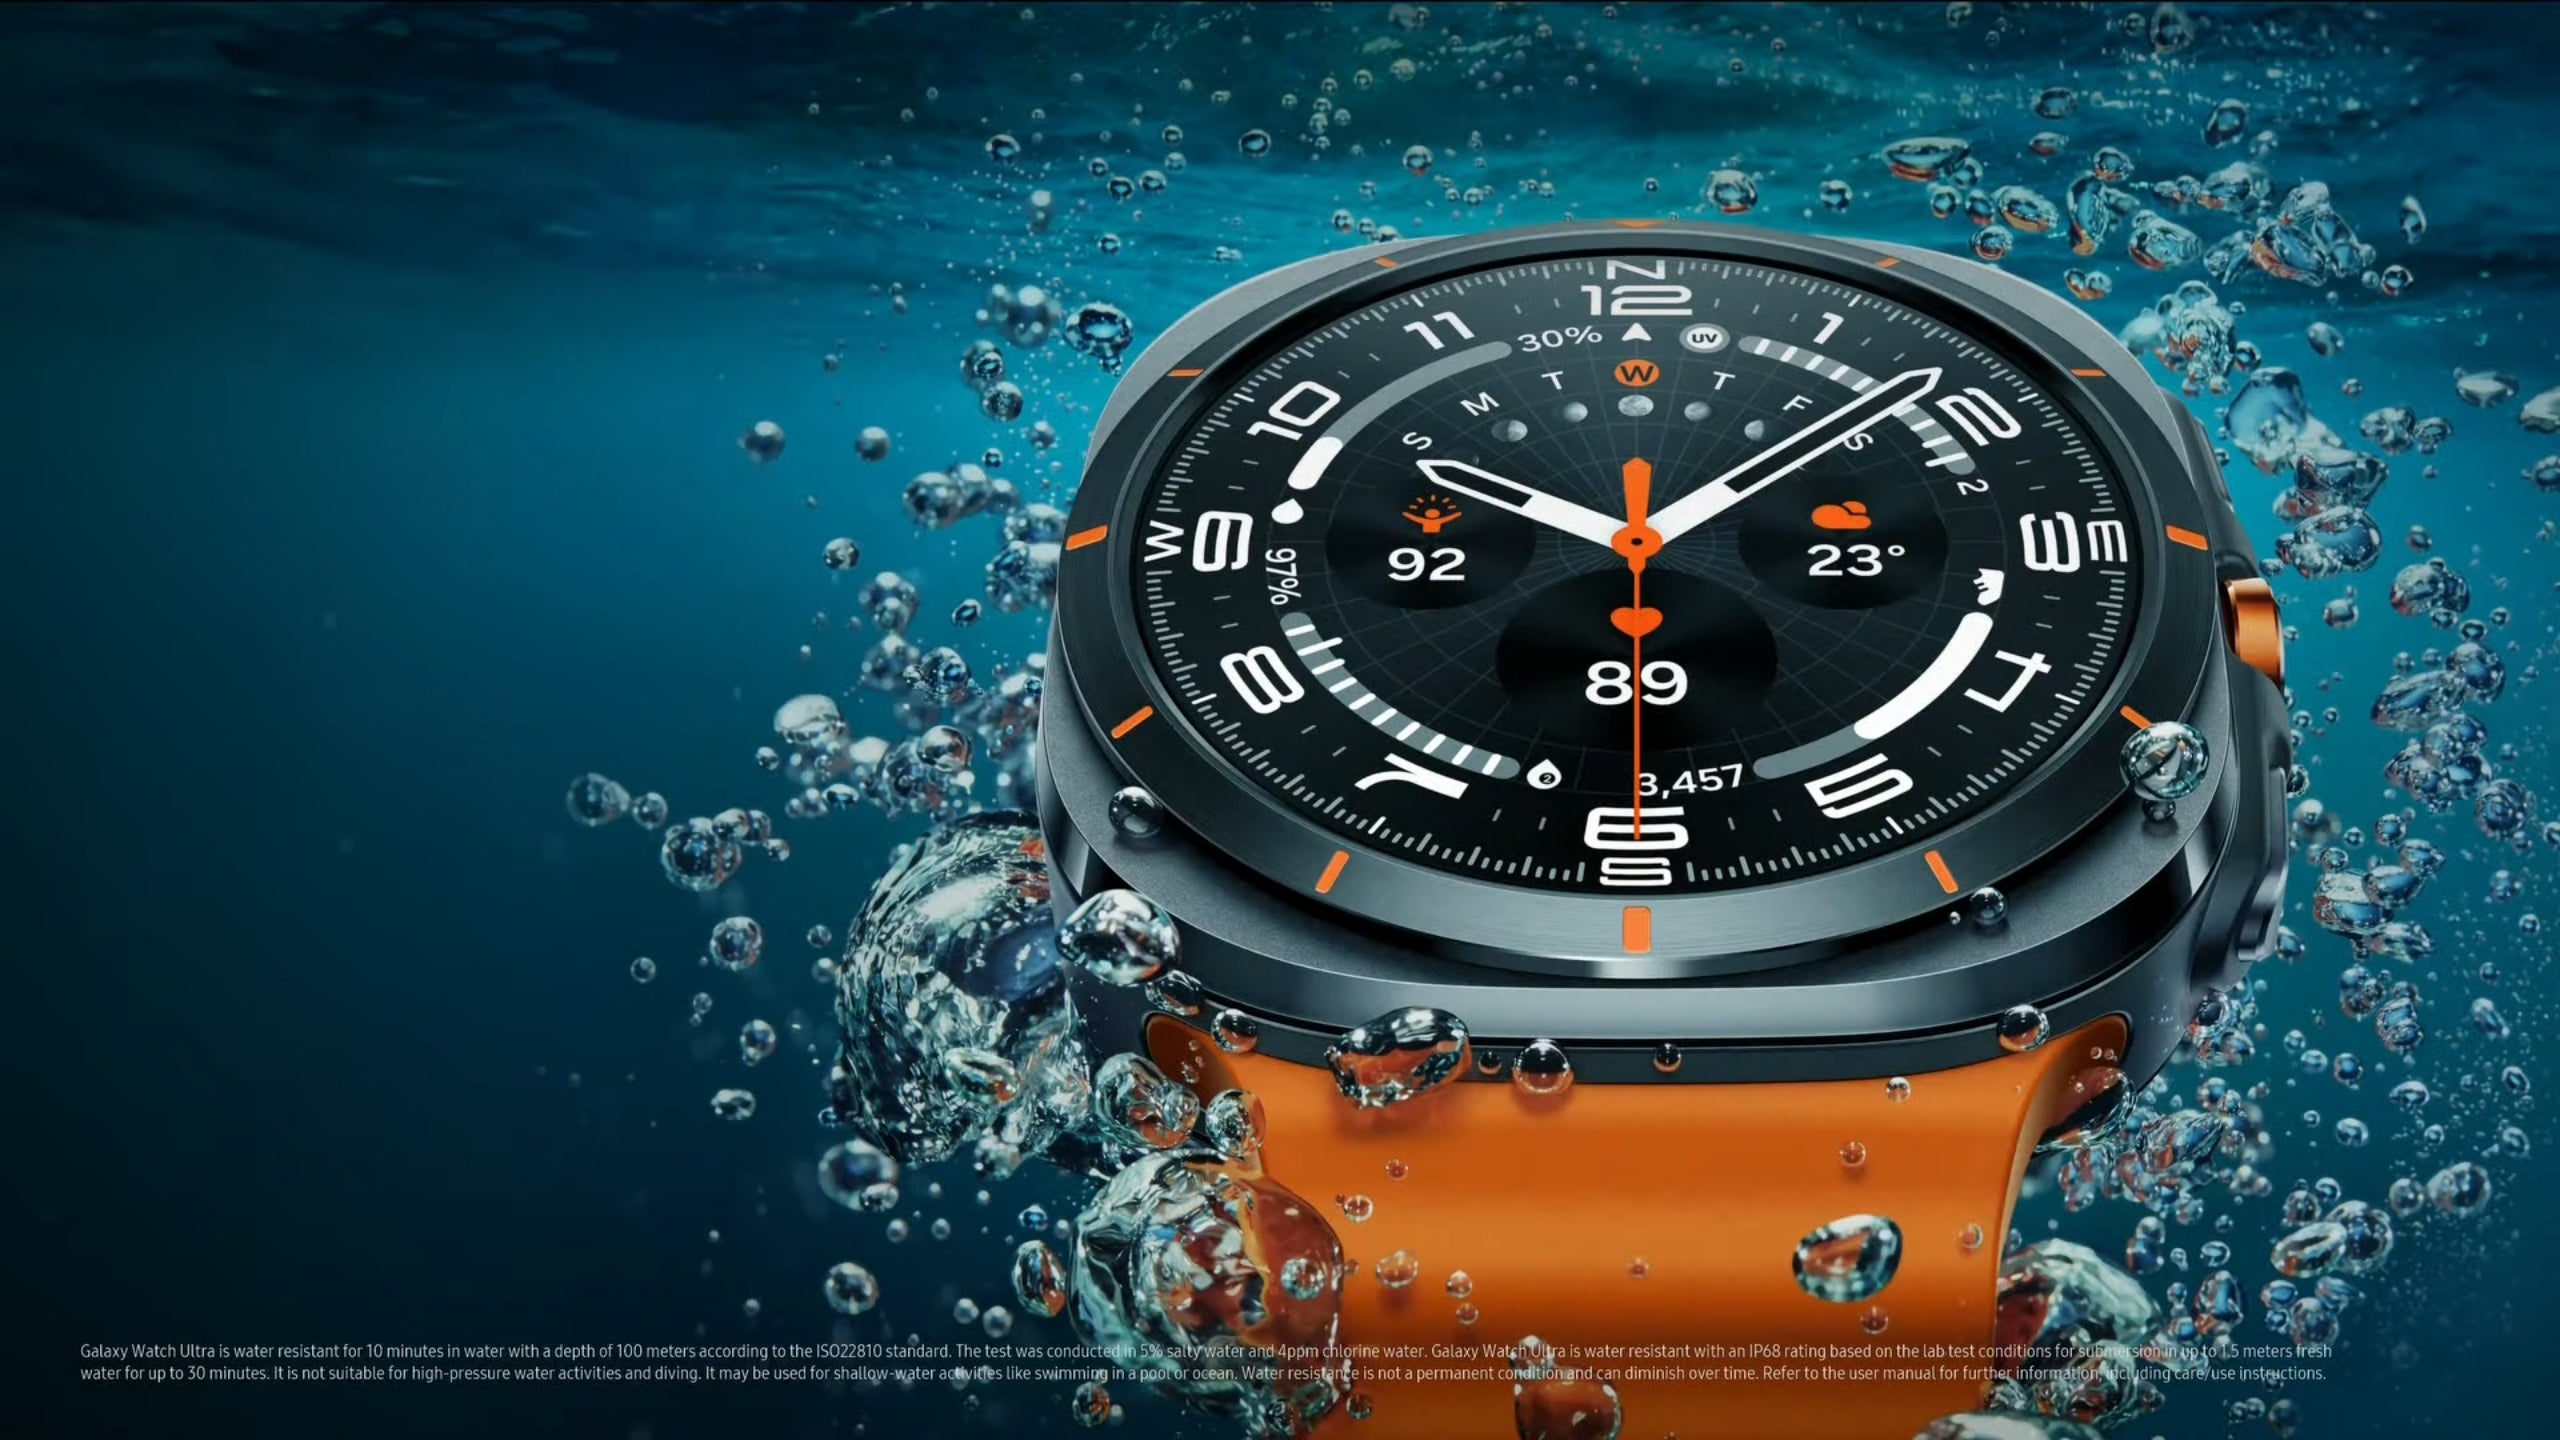 The Galaxy Watch Ultra is made to withstand amazing depths. - Samsung unleashes Galaxy Watch Ultra: The most powerful Galaxy Watch ever built